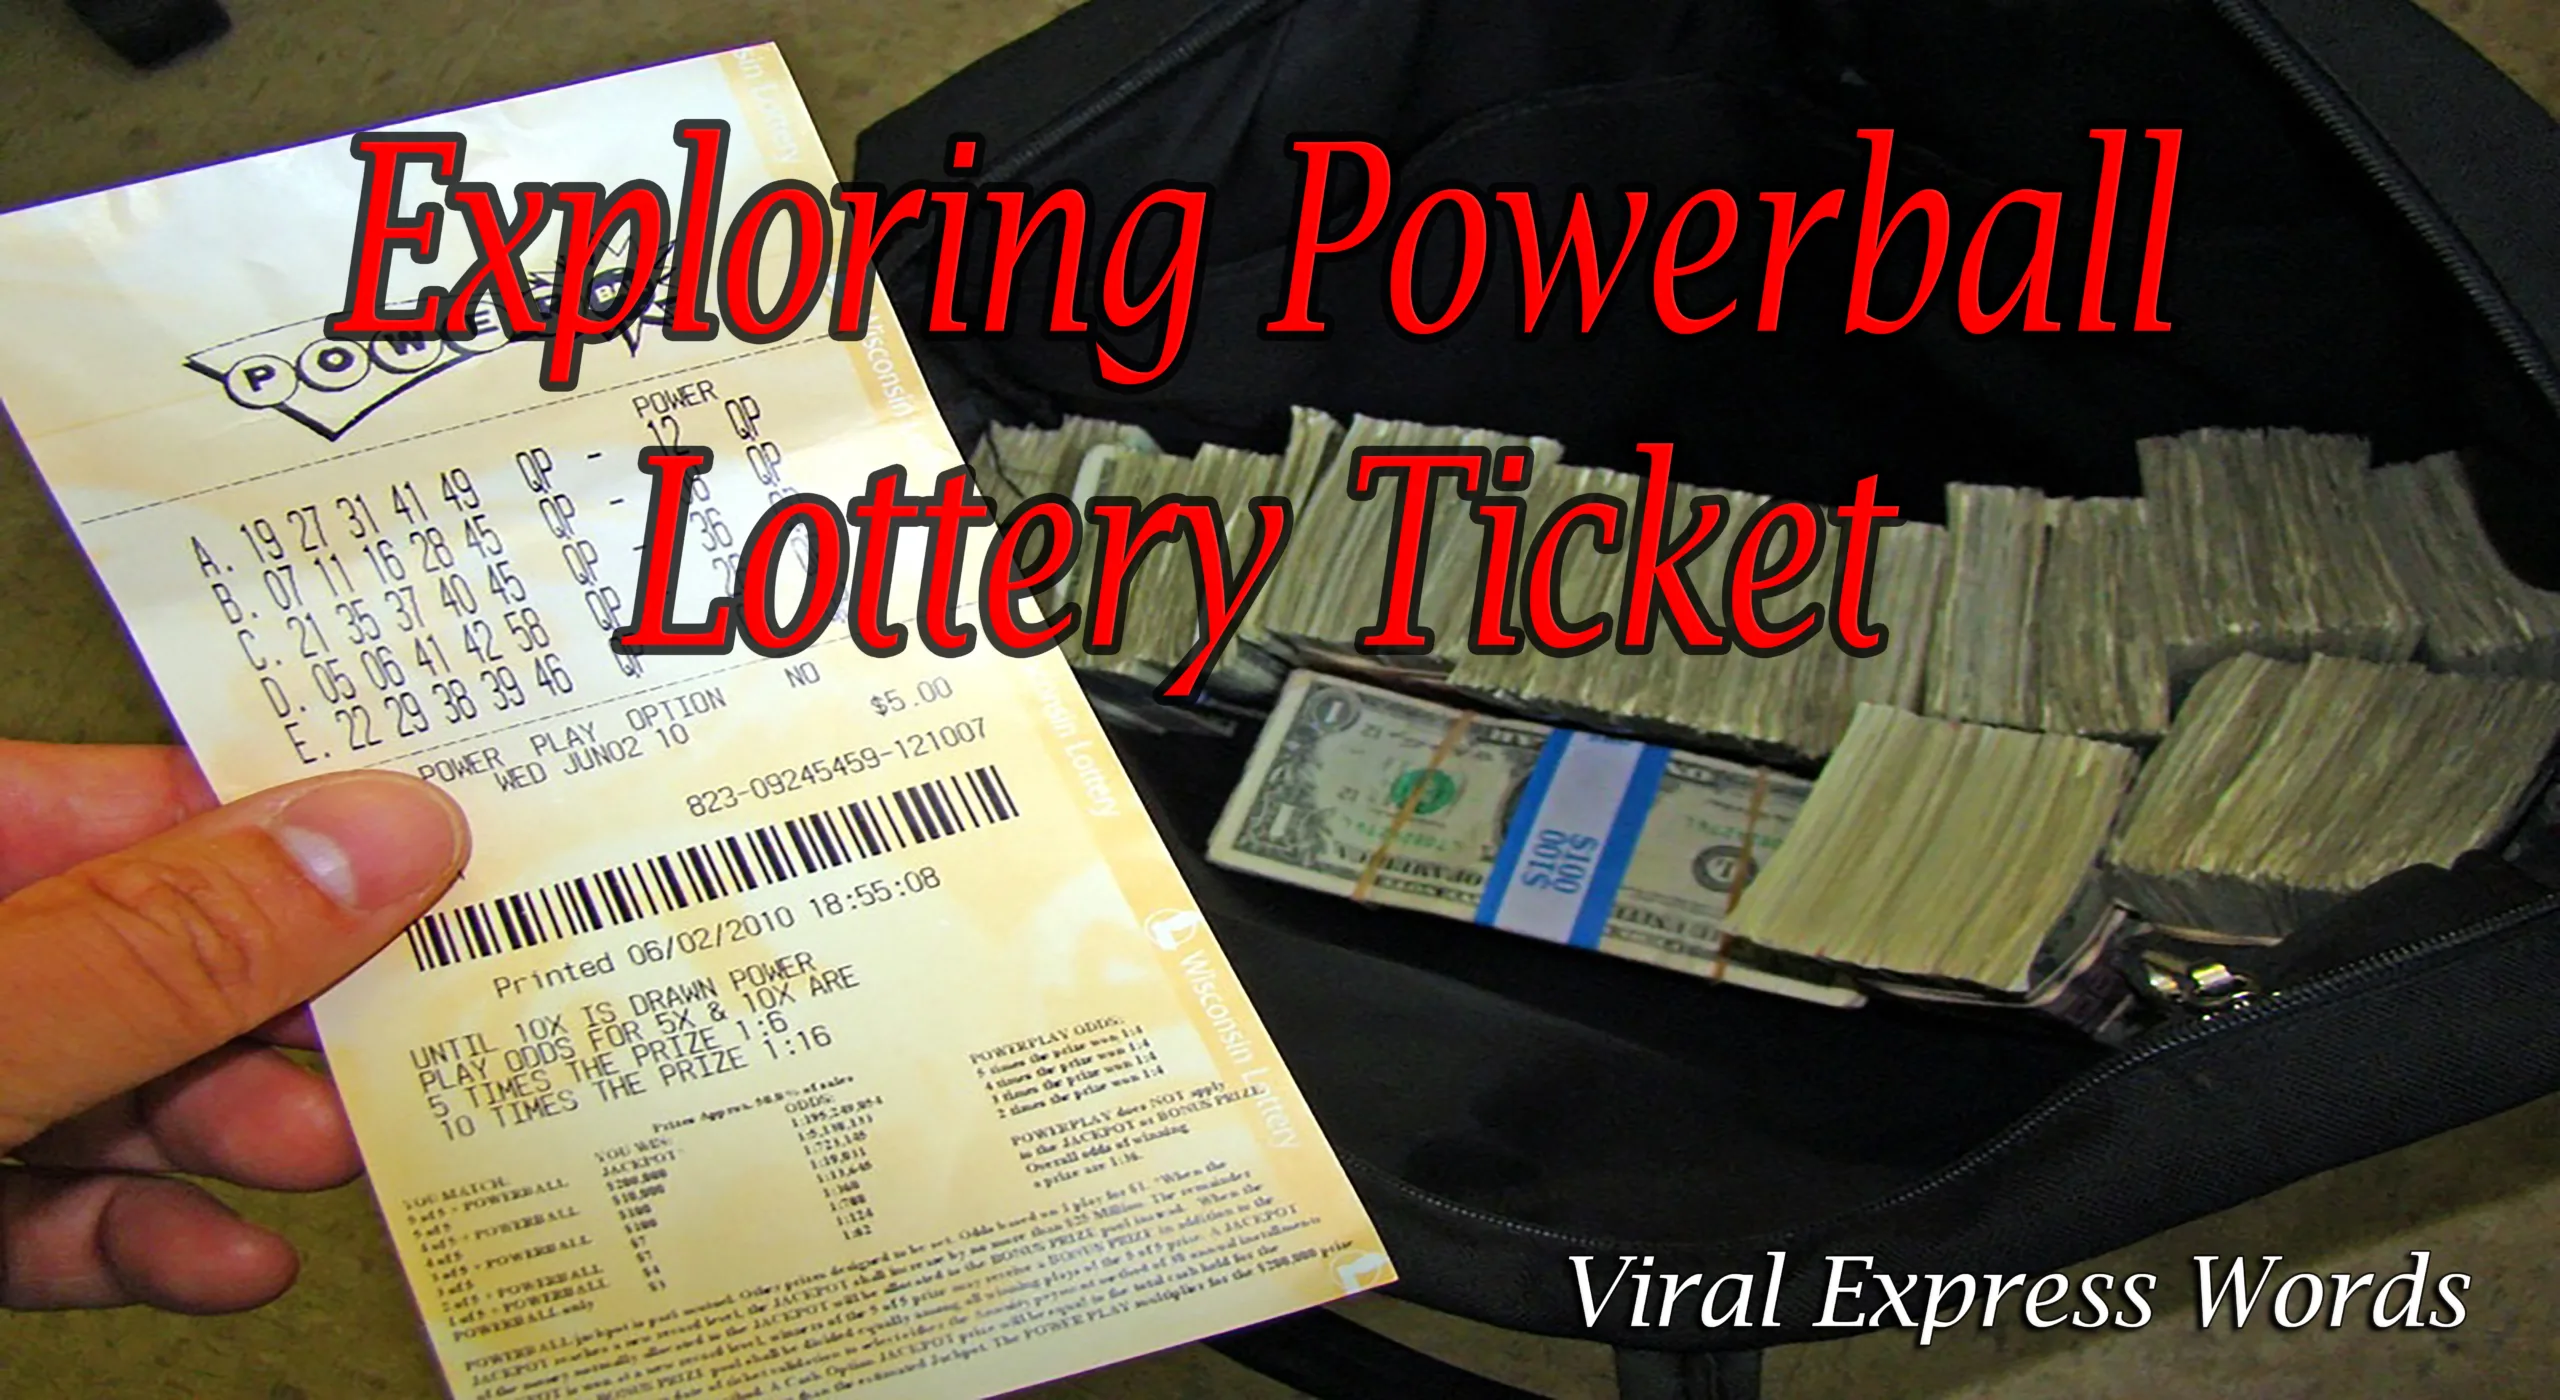 Close-up of a Playing Powerball lottery ticket with numbers filled in and a hand holding a pen, symbolizing exploration and engagement with the lottery.